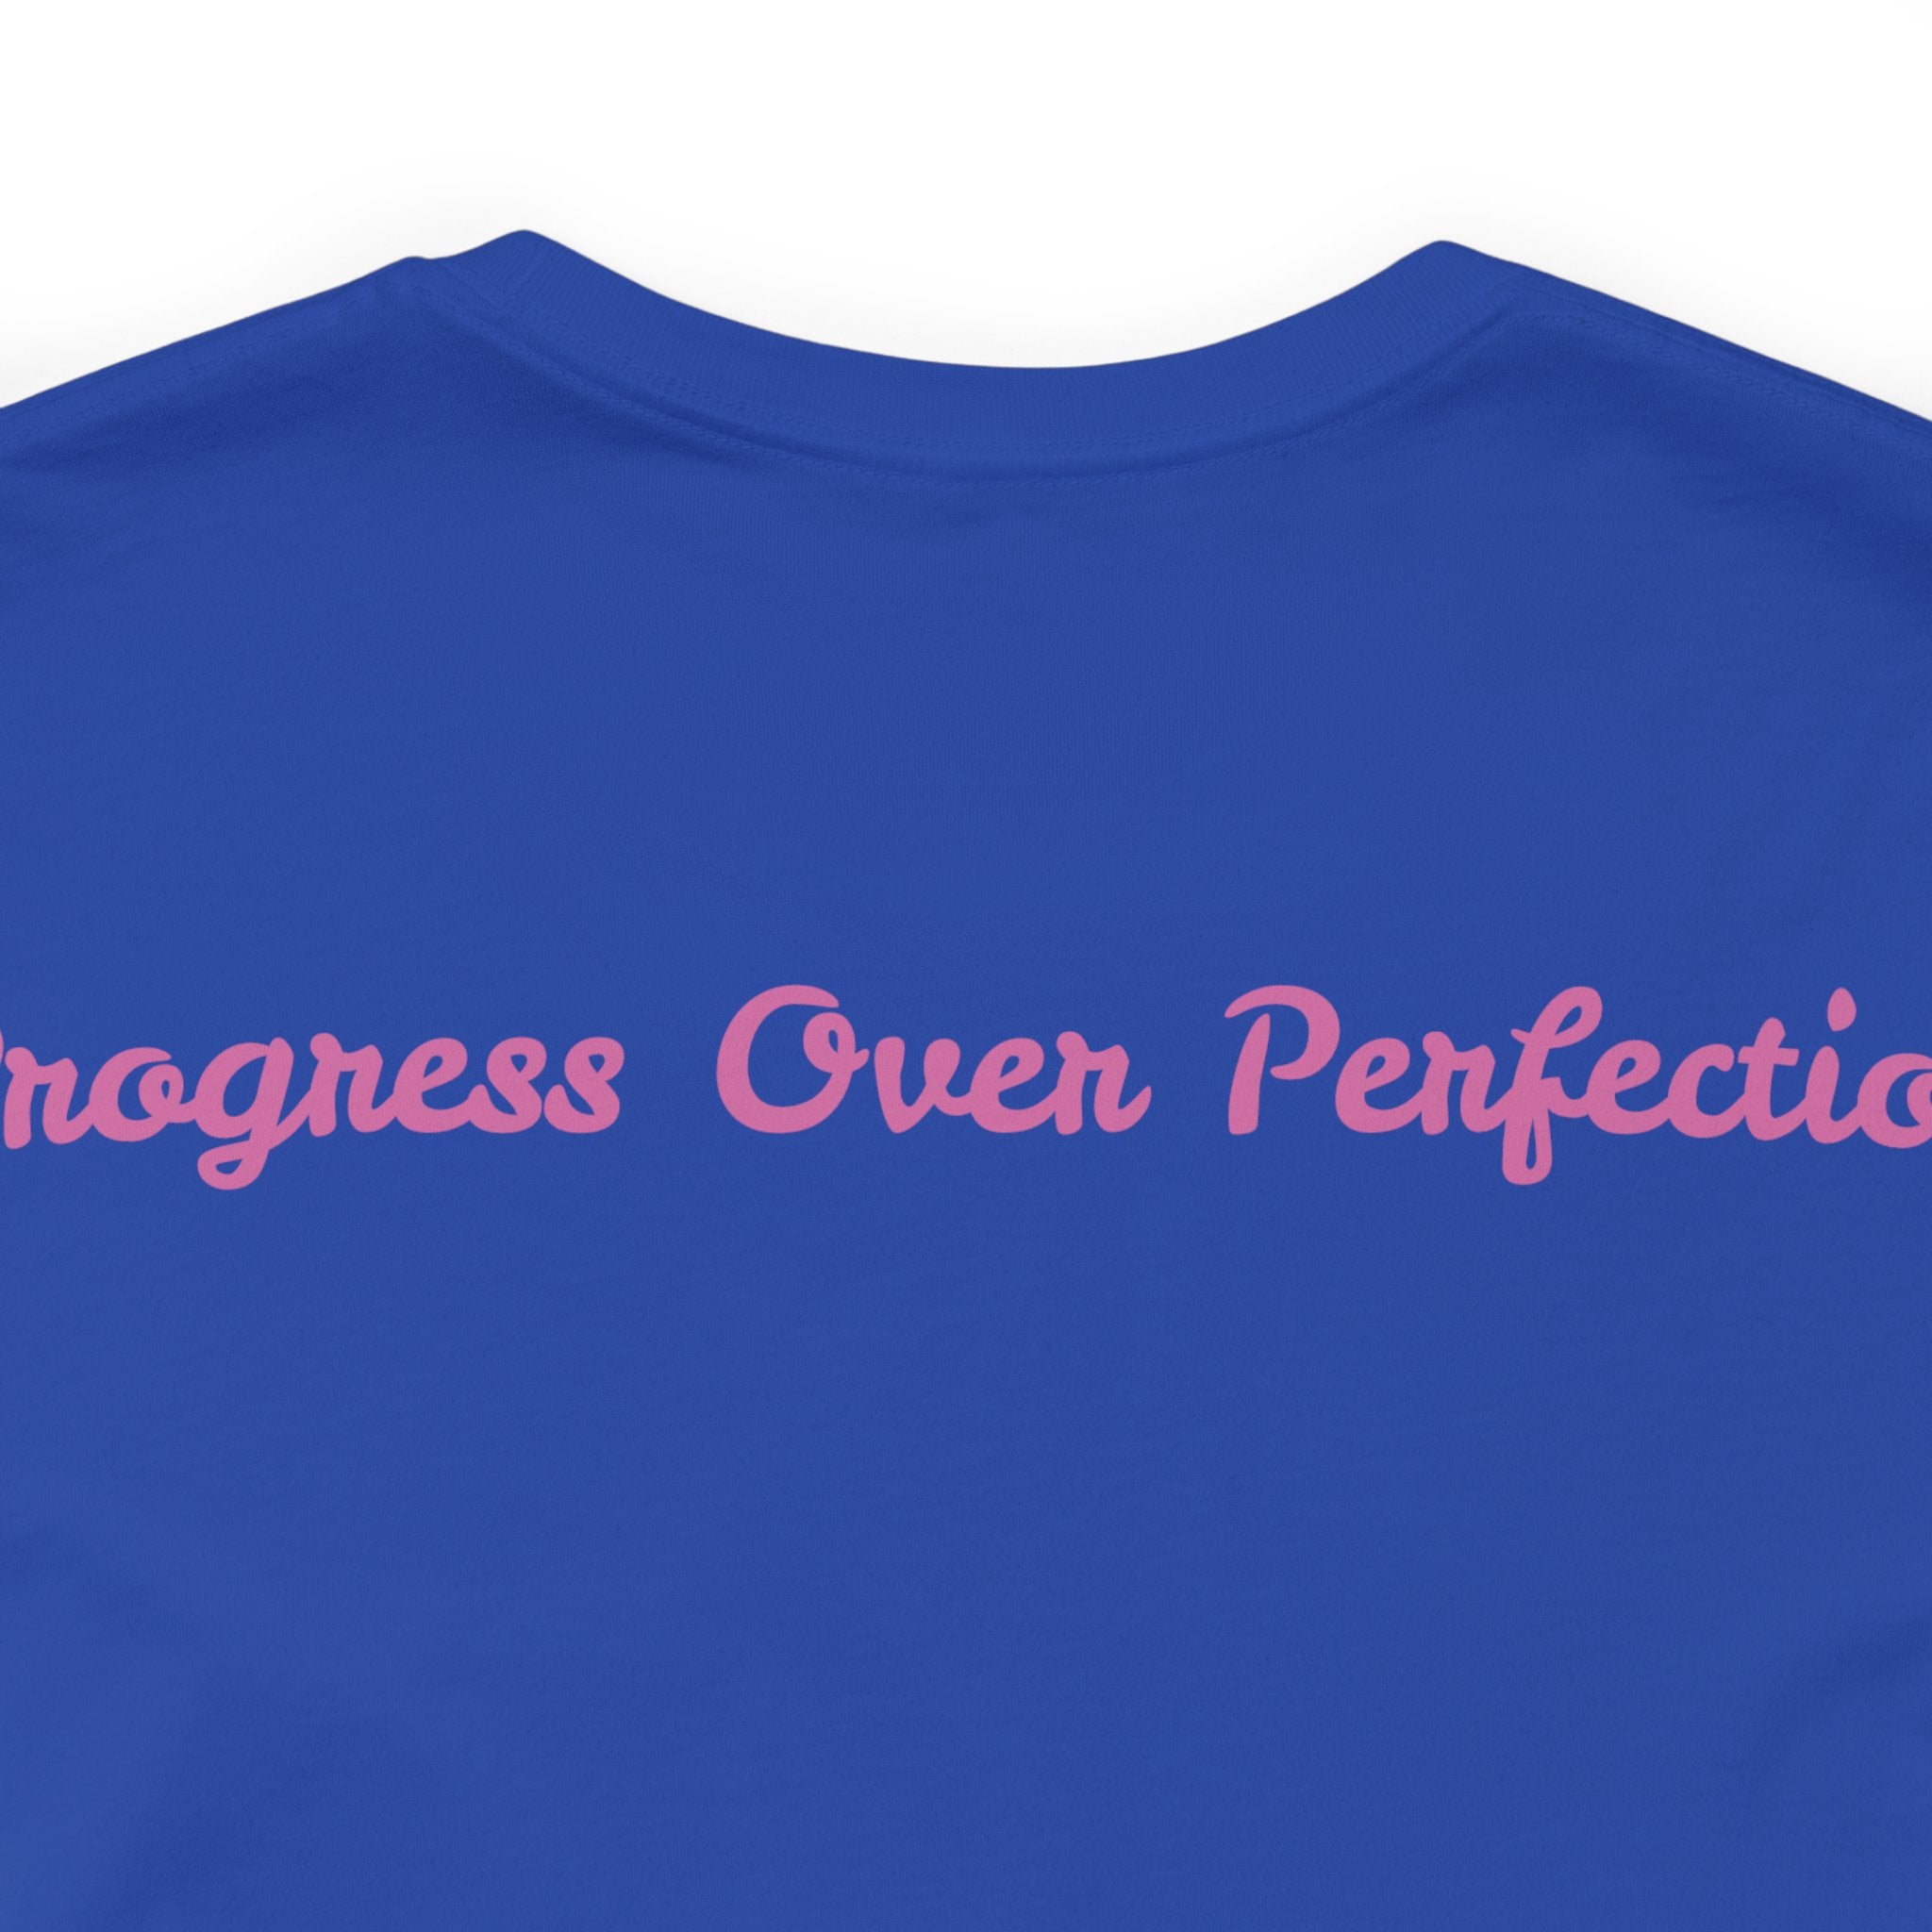 Progress Over Perfection Tee - Bella+Canvas 3001 Yellow Airlume Cotton Bella+Canvas 3001 Crew Neckline Jersey Short Sleeve Lightweight Fabric Mental Health Support Retail Fit Tear-away Label Tee Unisex Tee T-Shirt 2473798984544447964_2048 Printify